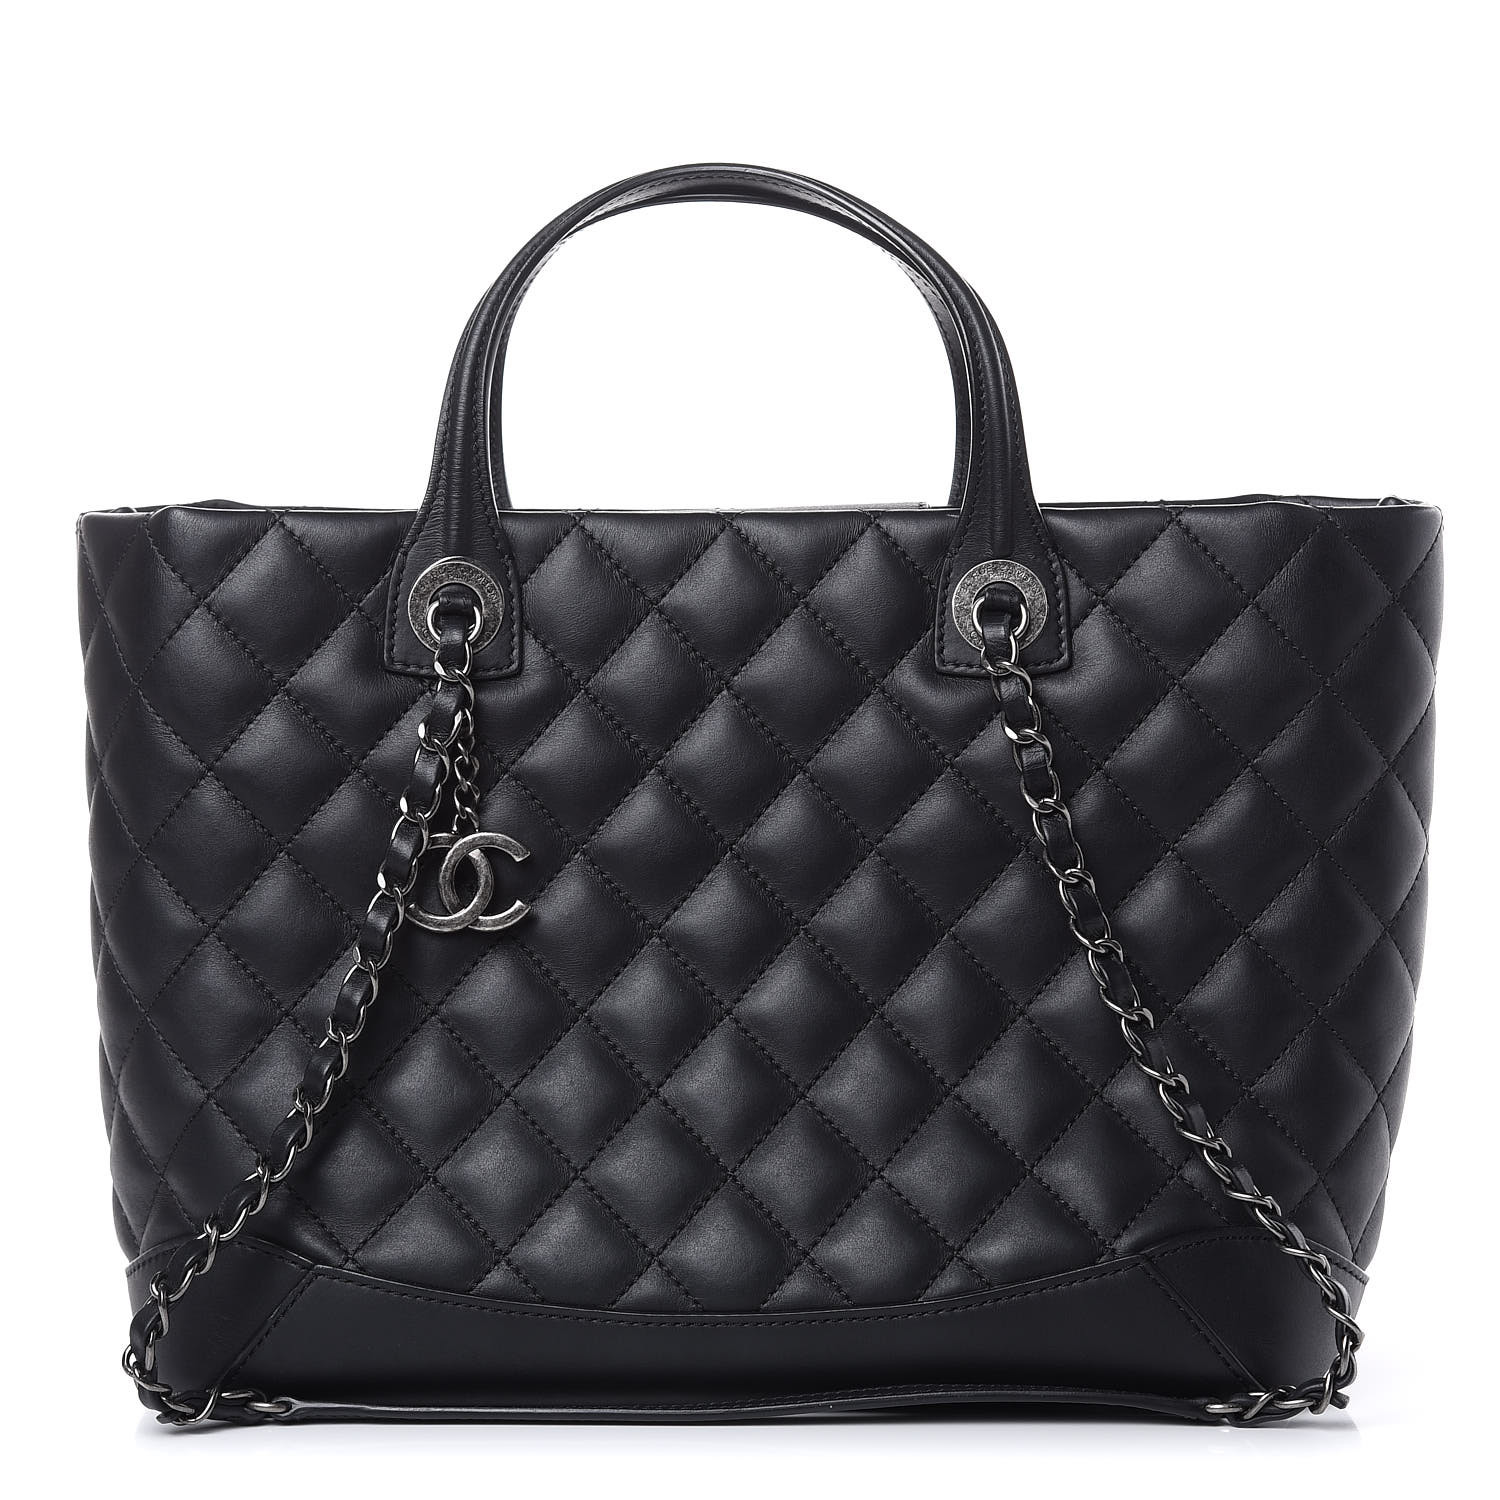 Chanel Quilted Handbags | IQS Executive